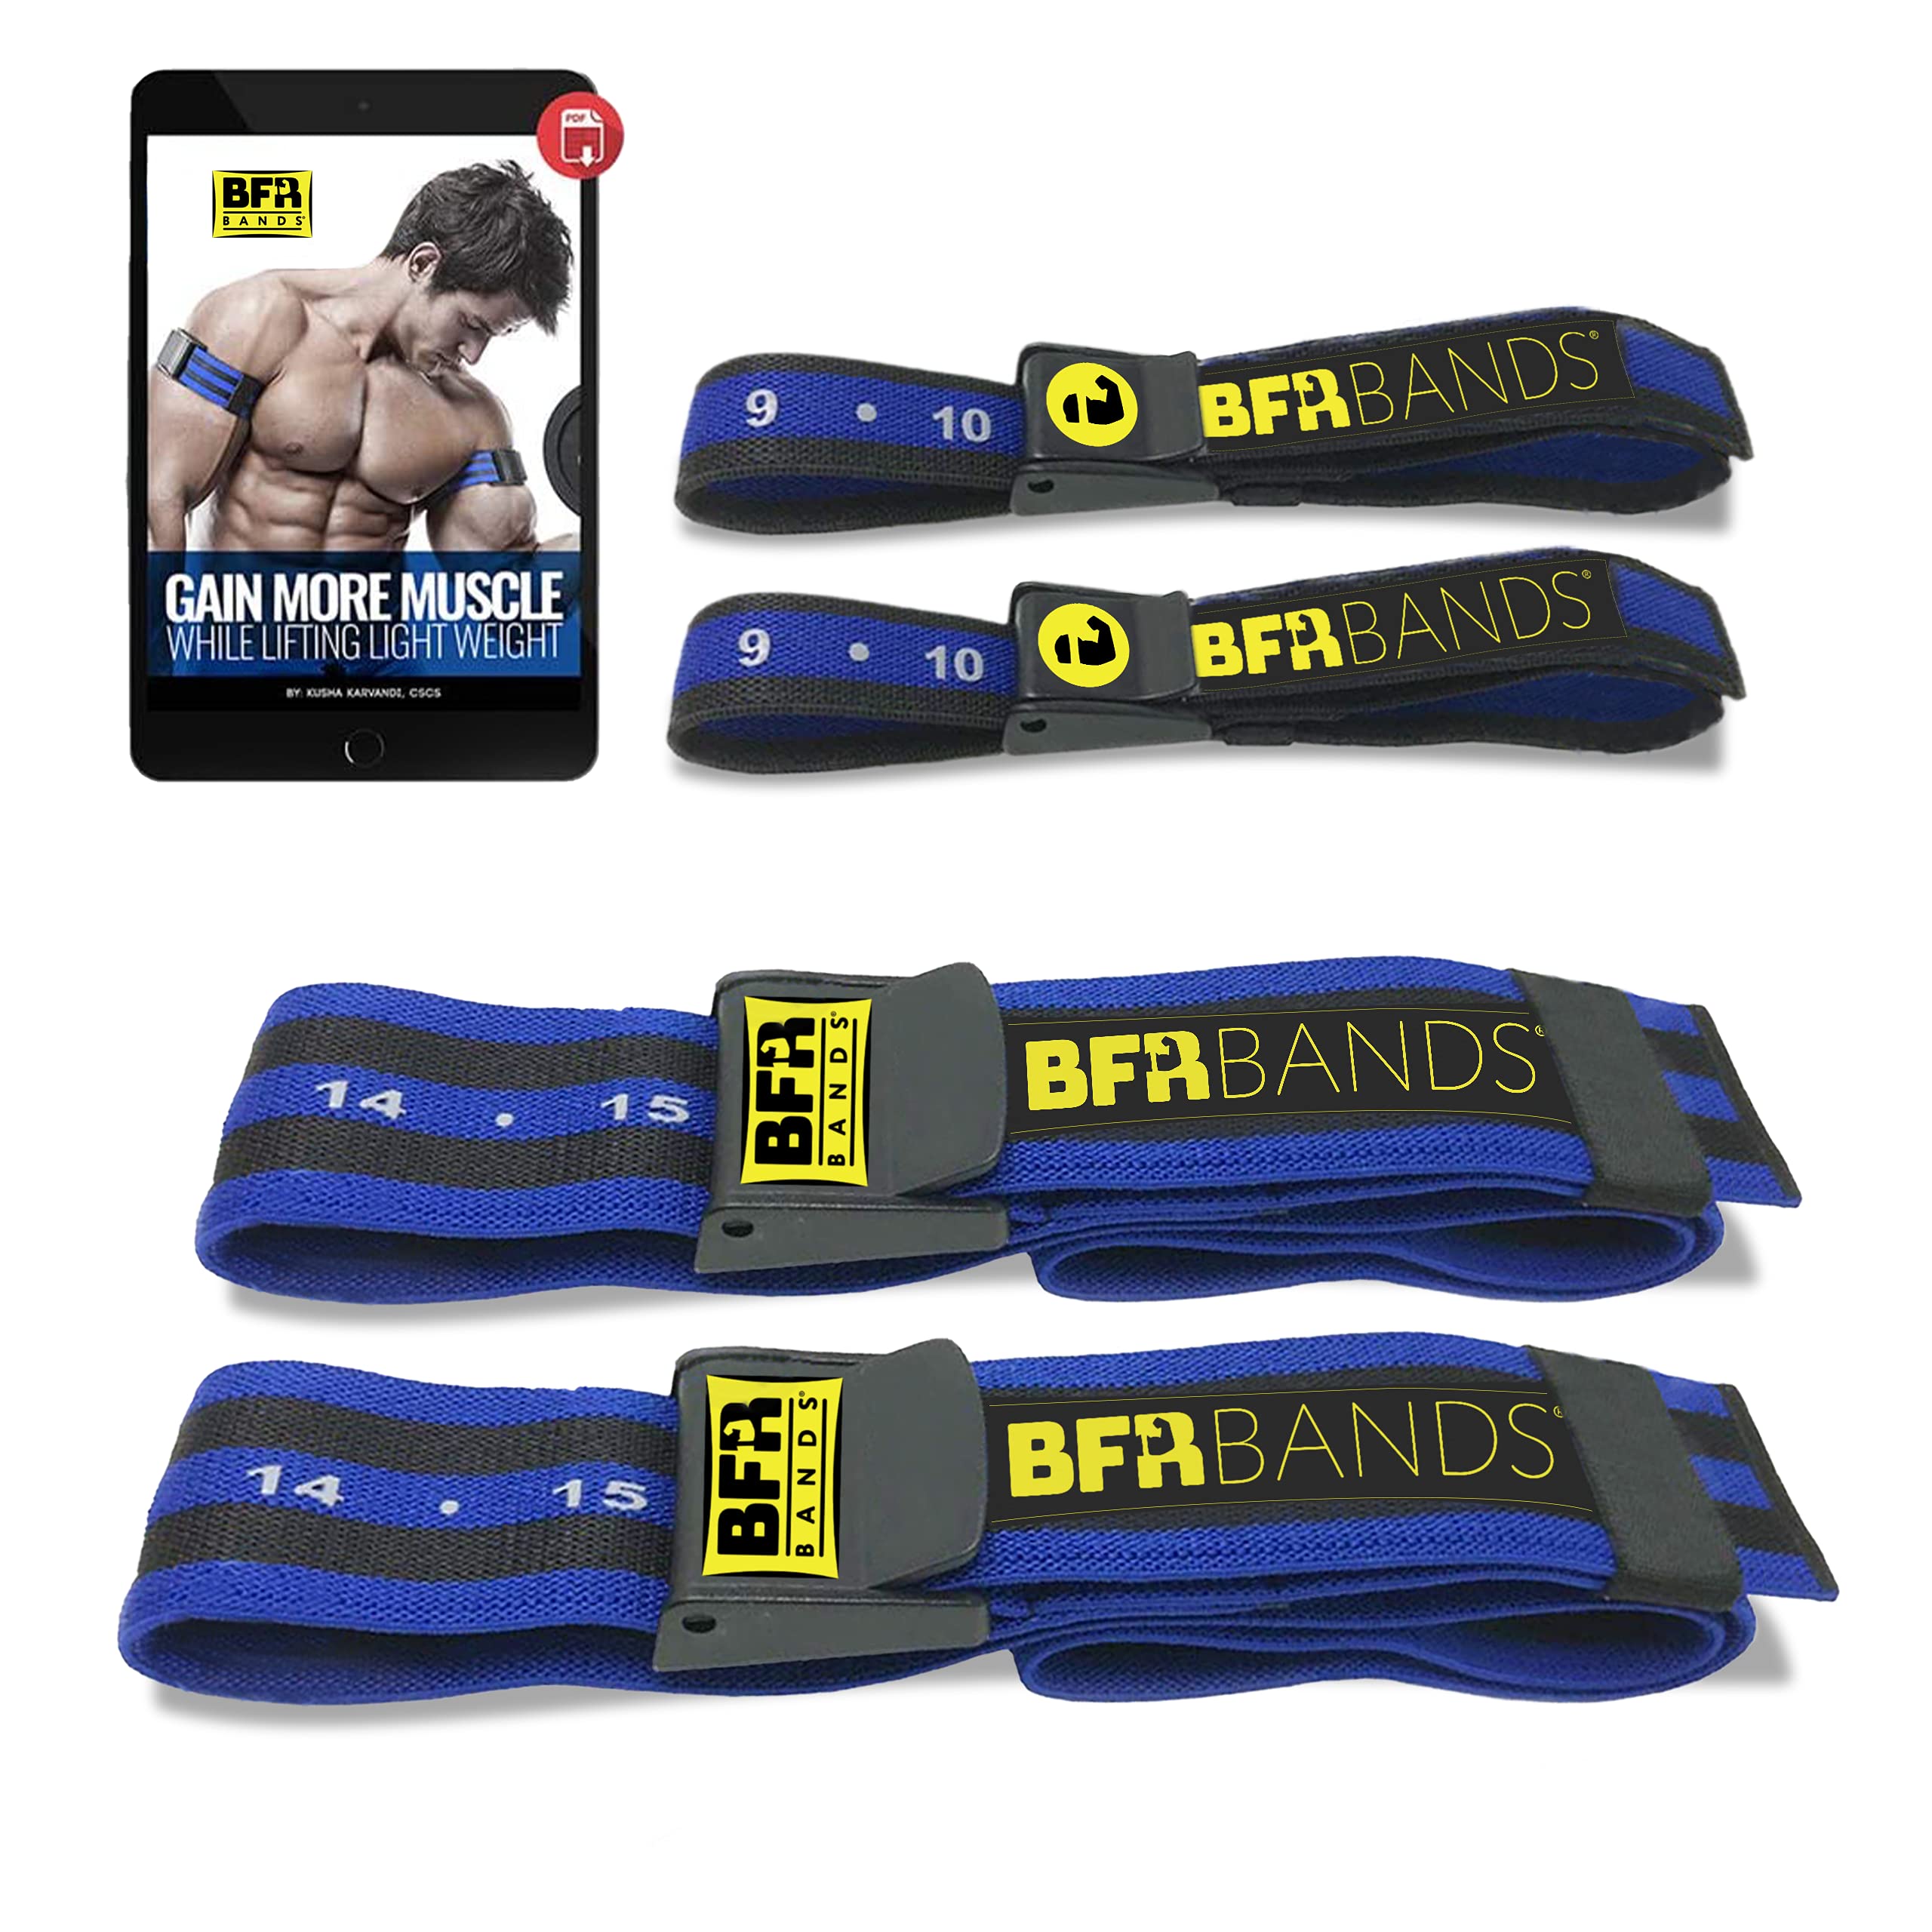 BFR BANDS Occlusion Training Bands, Blood Flow Restriction Bands for Arms, Legs or Glutes, Help Gain Muscle Without Lifting Heavy Weights, Strong Elastic Strap + Quick-Release